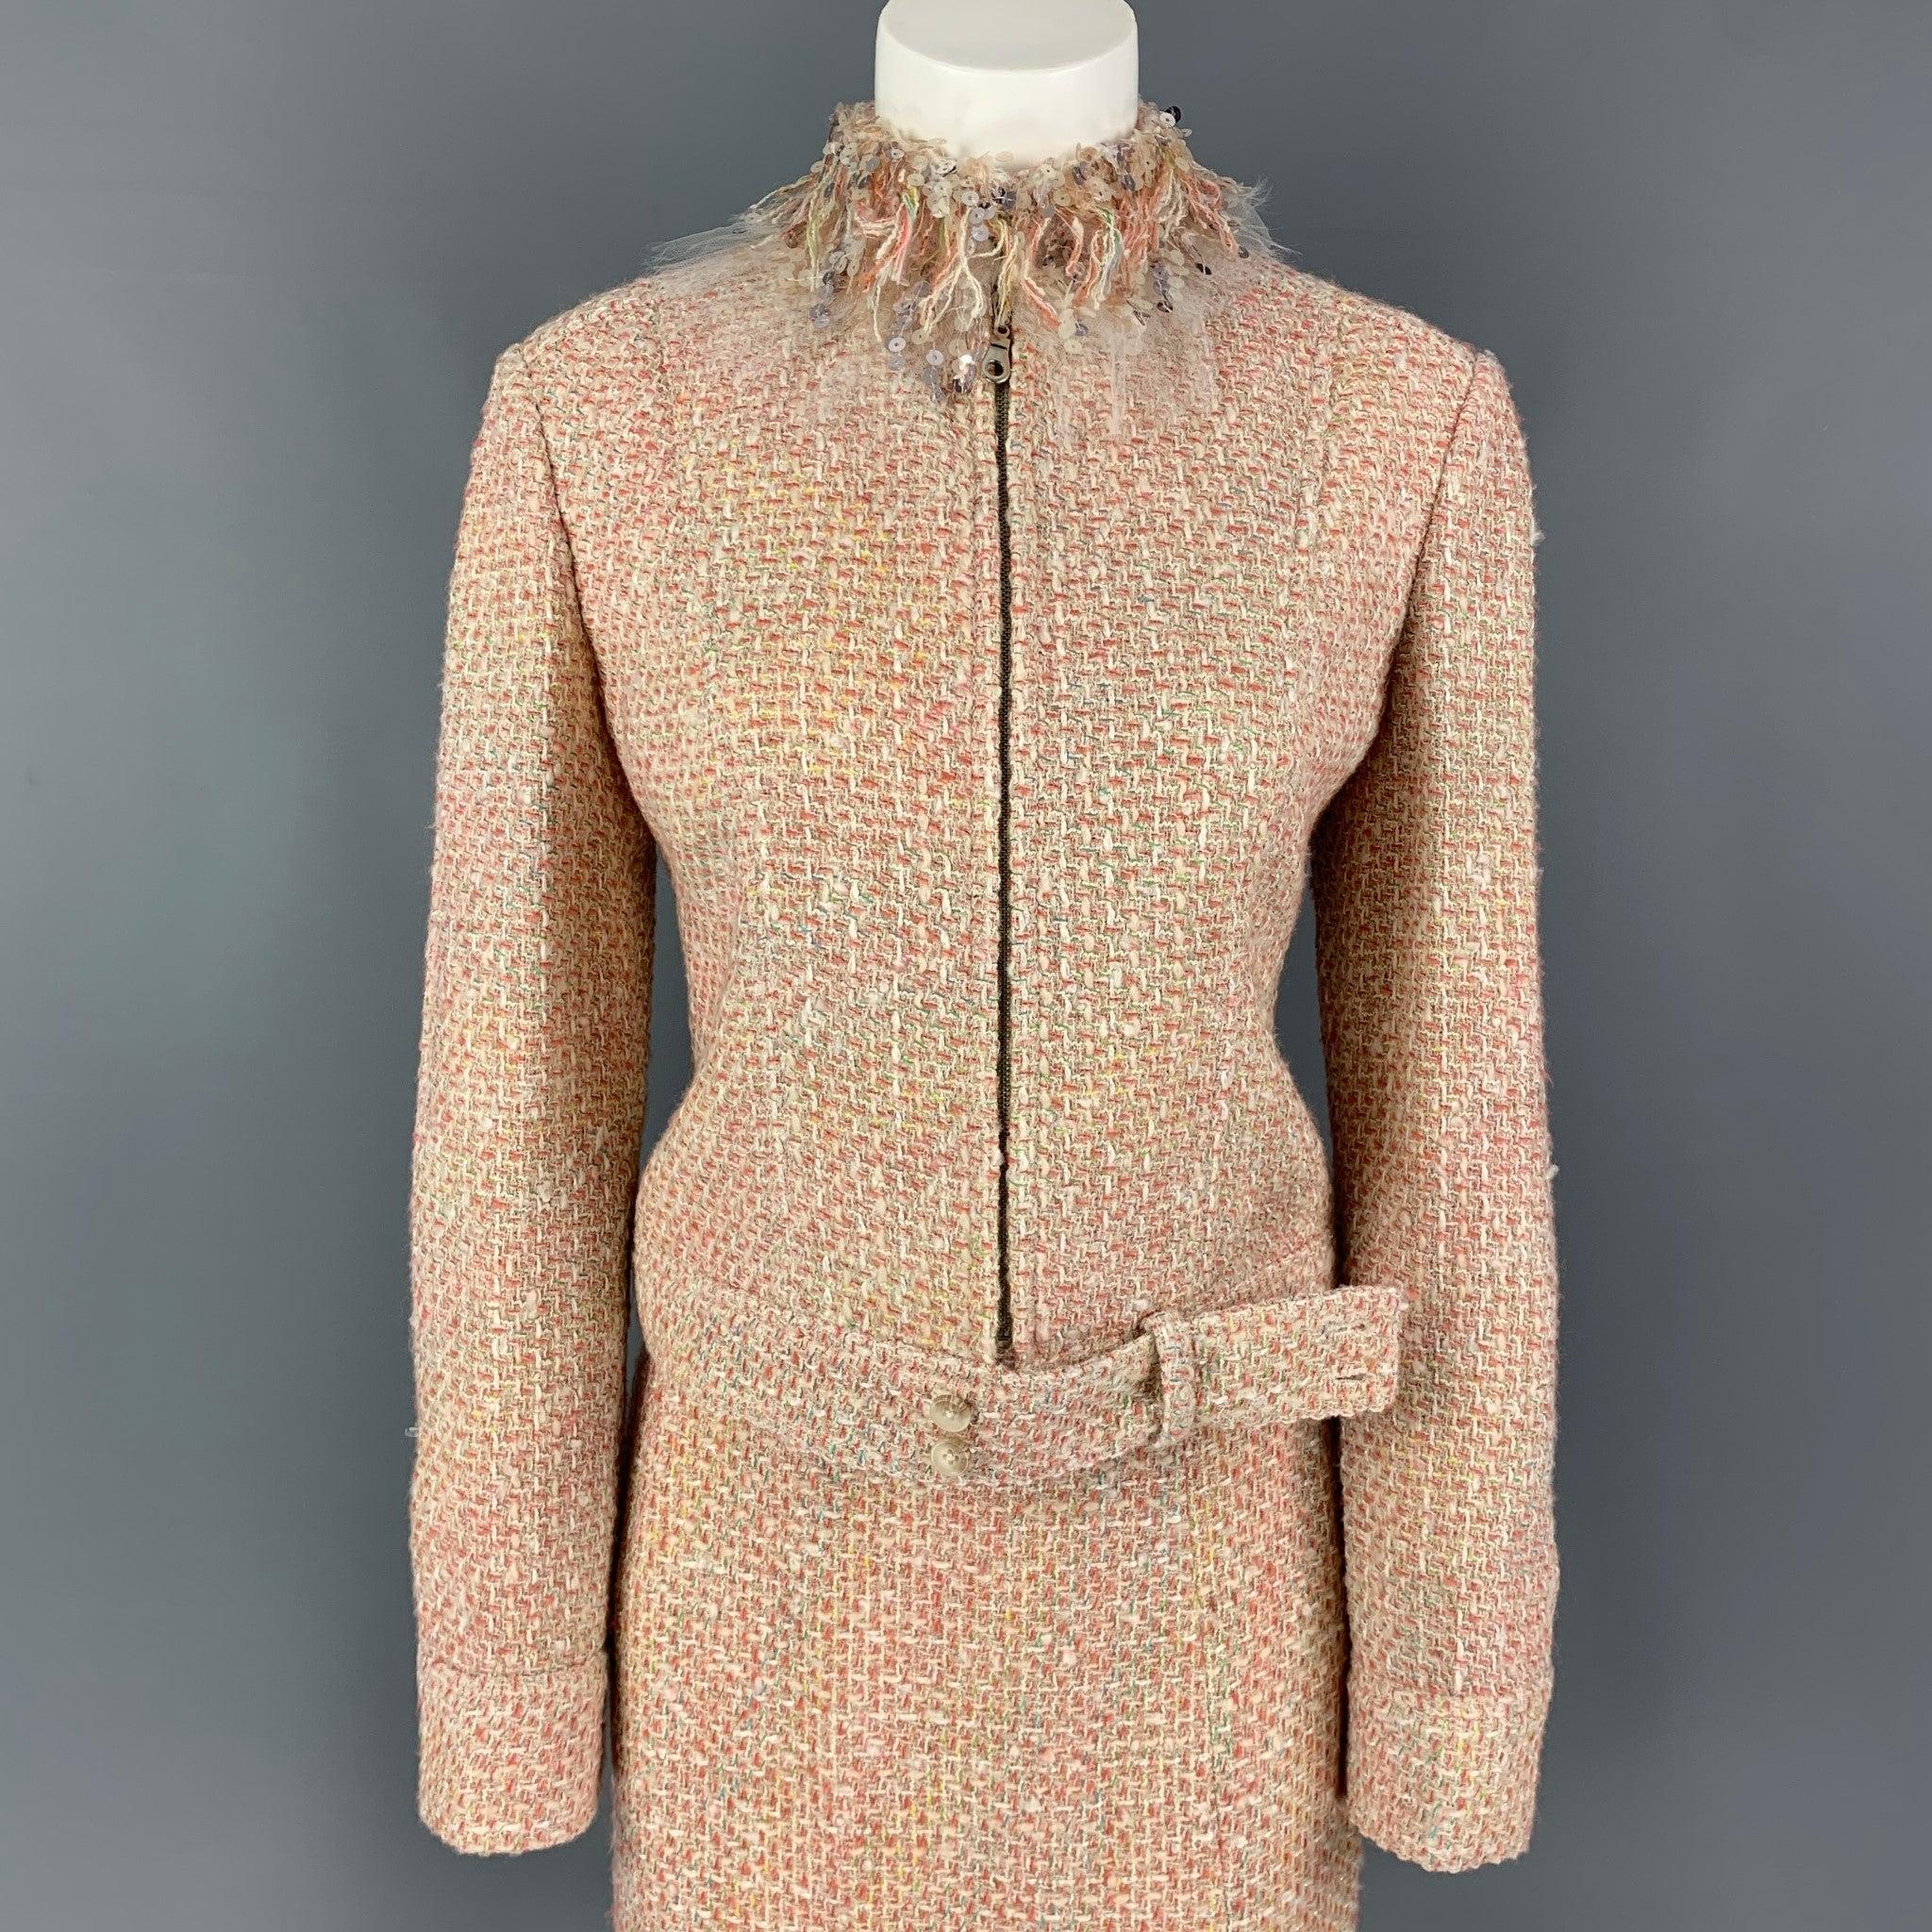 MONIQUE LHUILLIER skirt set comes in a beige & salmon boucle viscose blend jacket featuring a sequined fringe collar, strap detail, full zip up closure, and a matching pencil skirt. Made in USA.
Very Good
Pre-Owned Condition. 

Marked:   Jacket Size